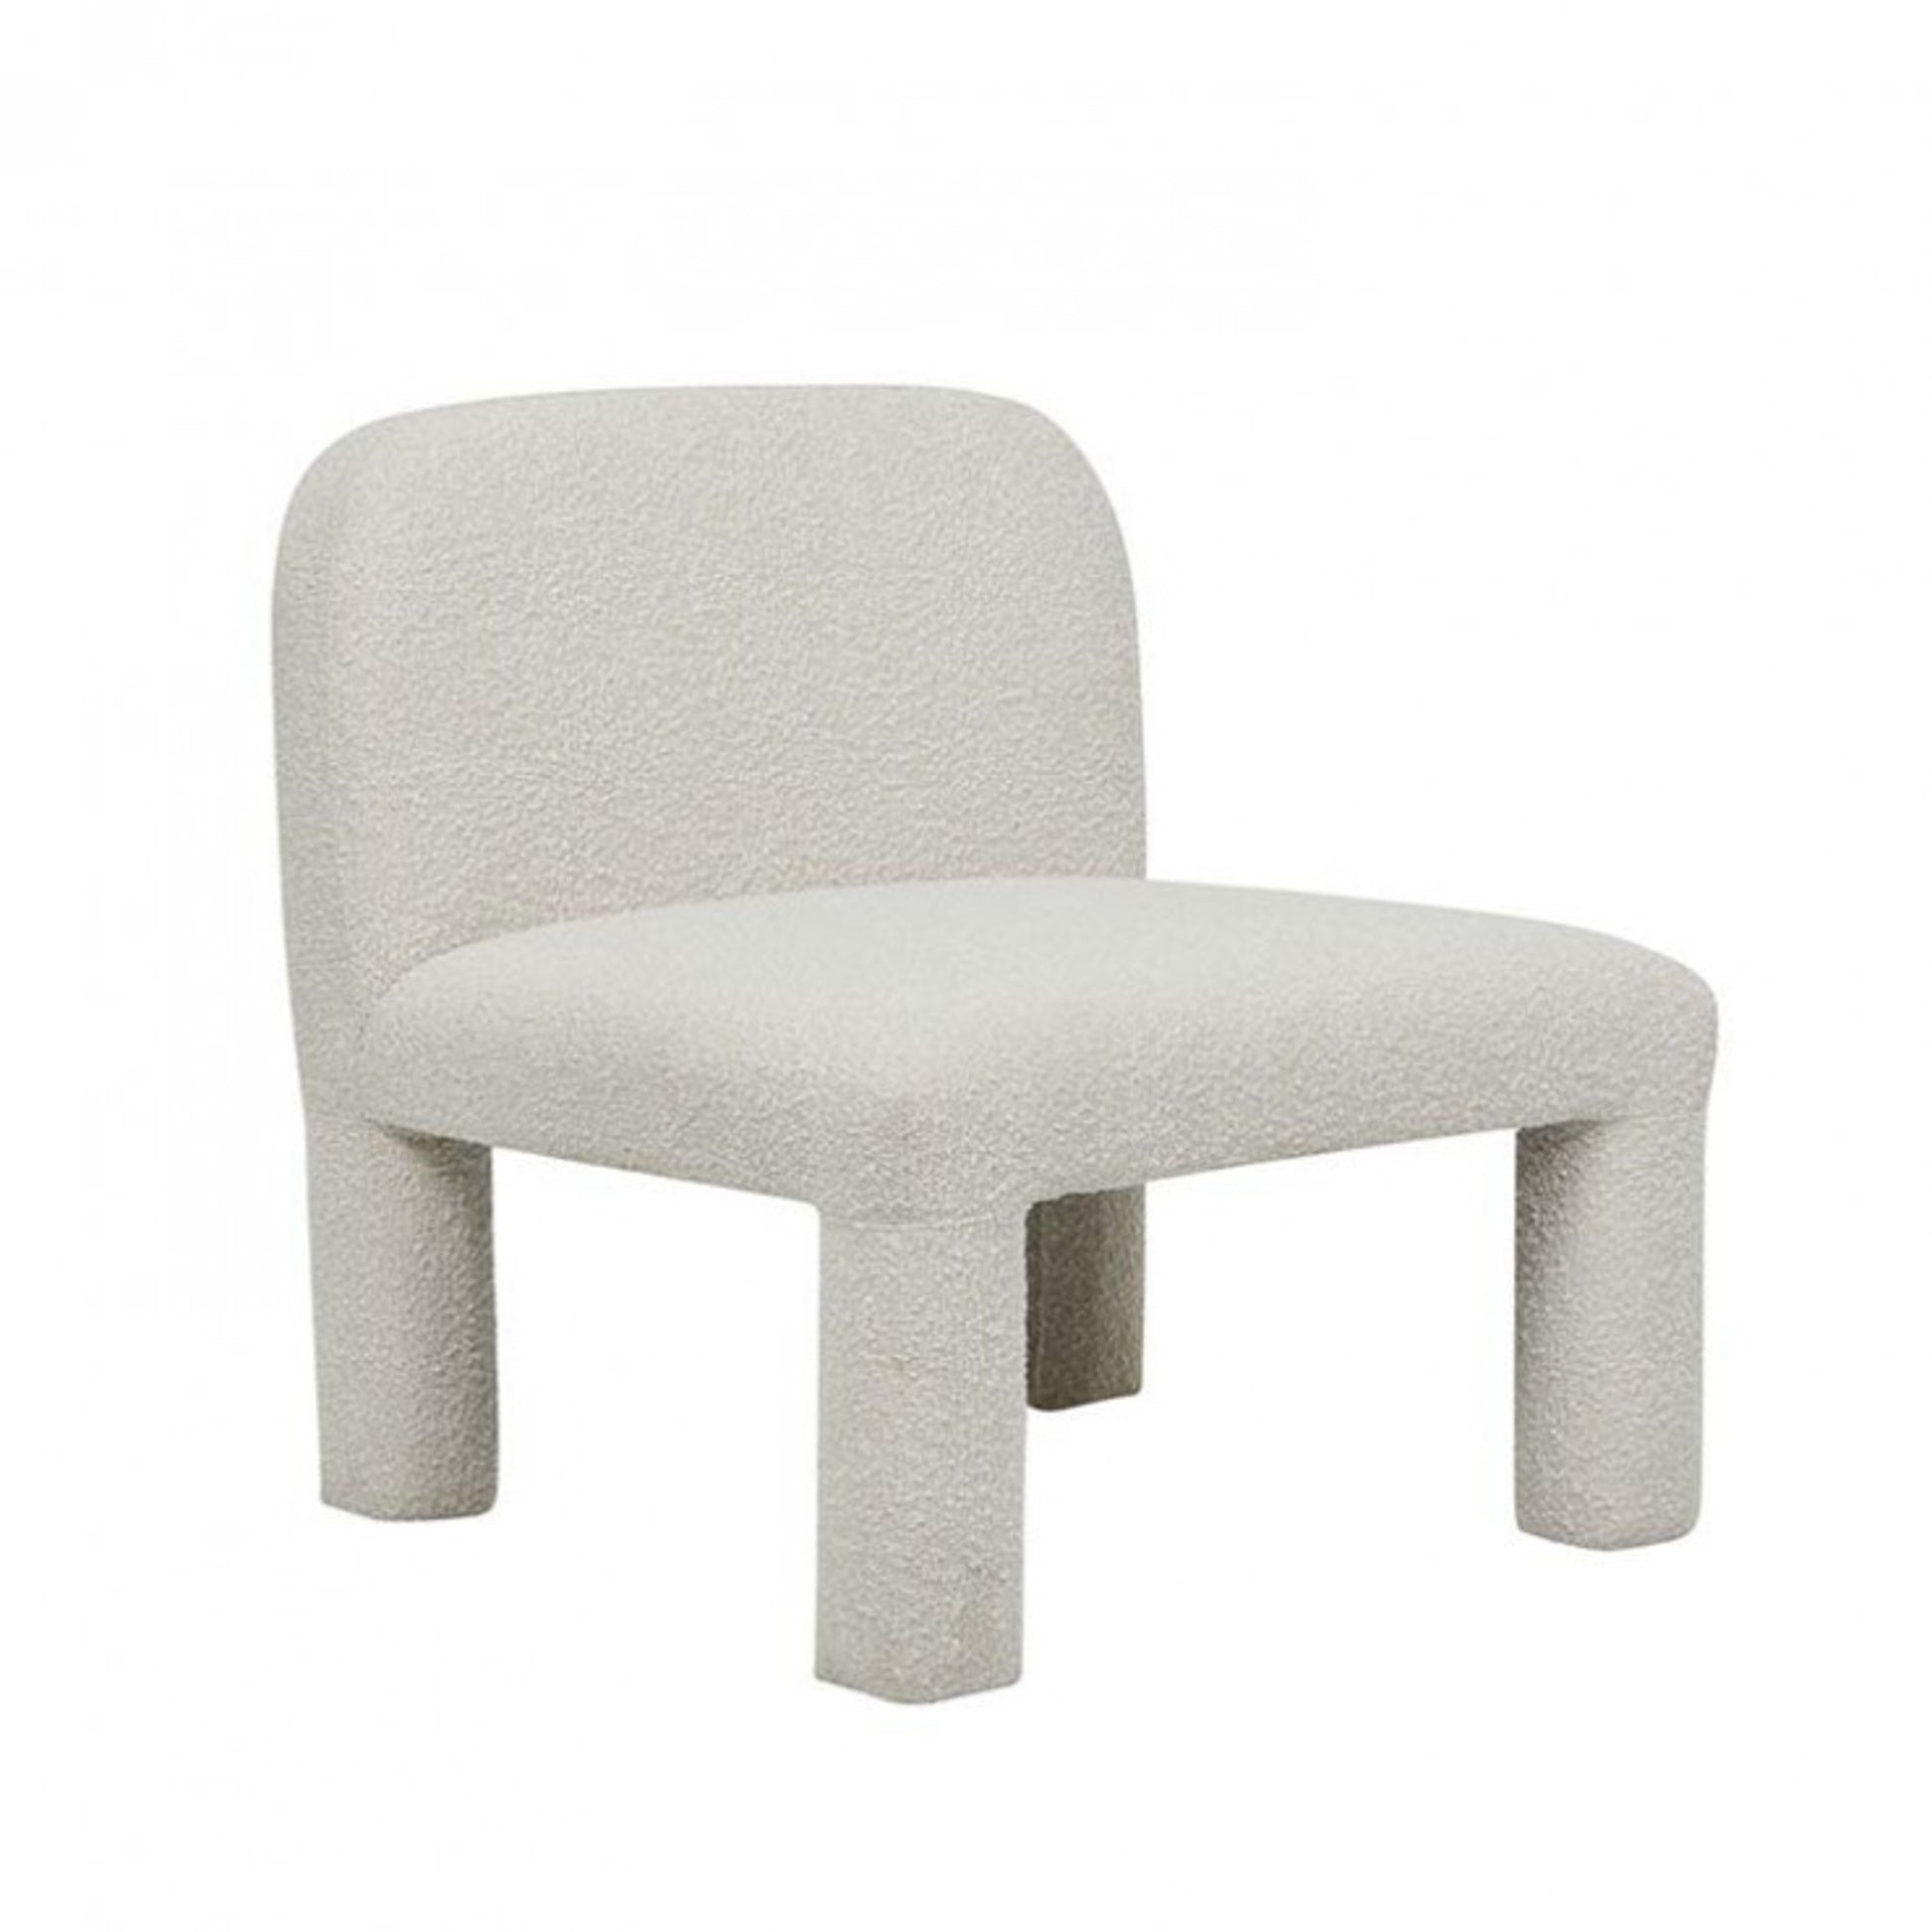 Hugo Arc occasional chair in oat